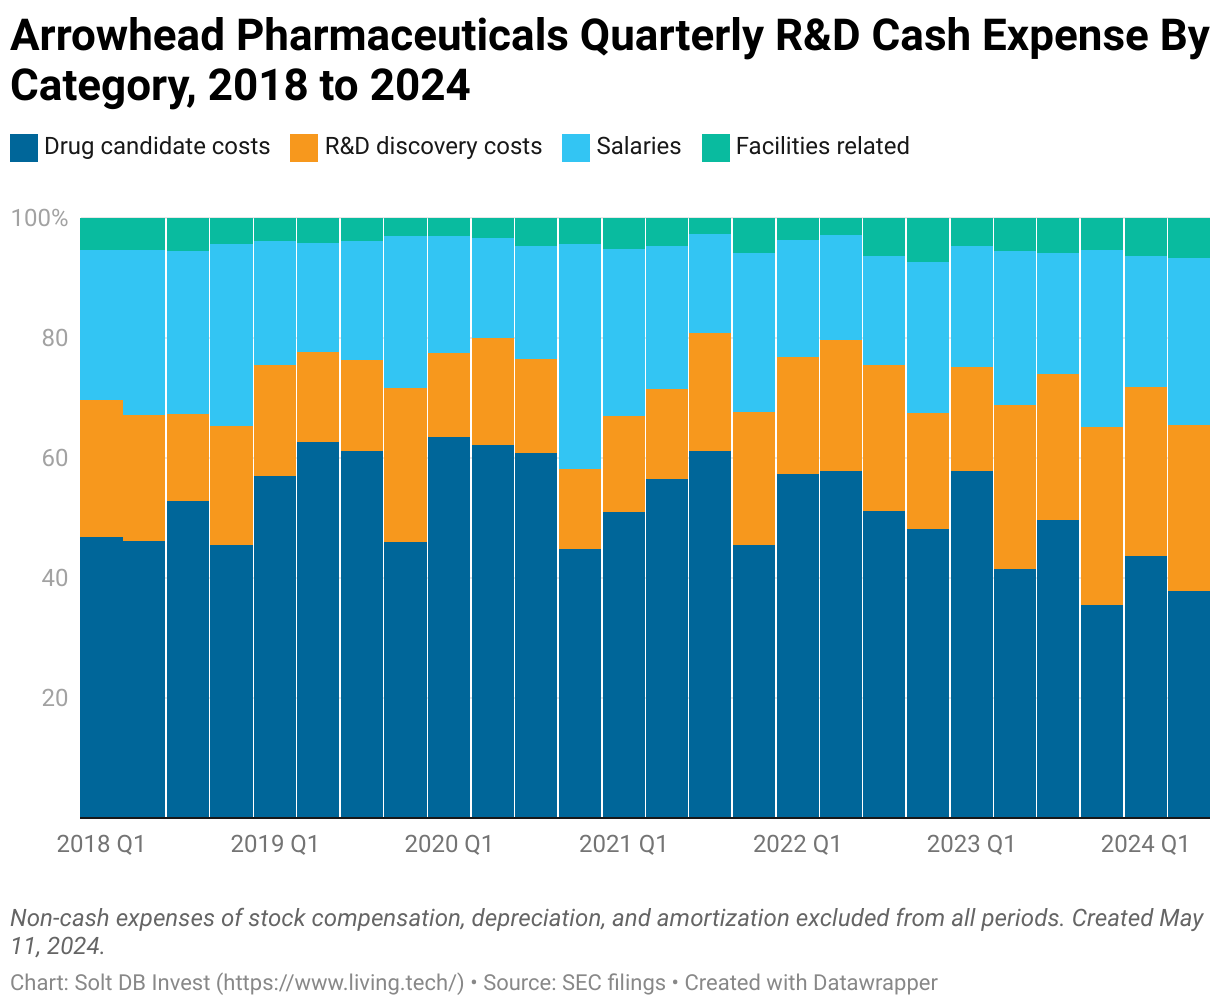 A line chart showing R and D expenses of Arrowhead Pharmaceuticals broken down by drug discovery, clinical development, salaries, and facilities from Q1 2018 to Q2 2024.